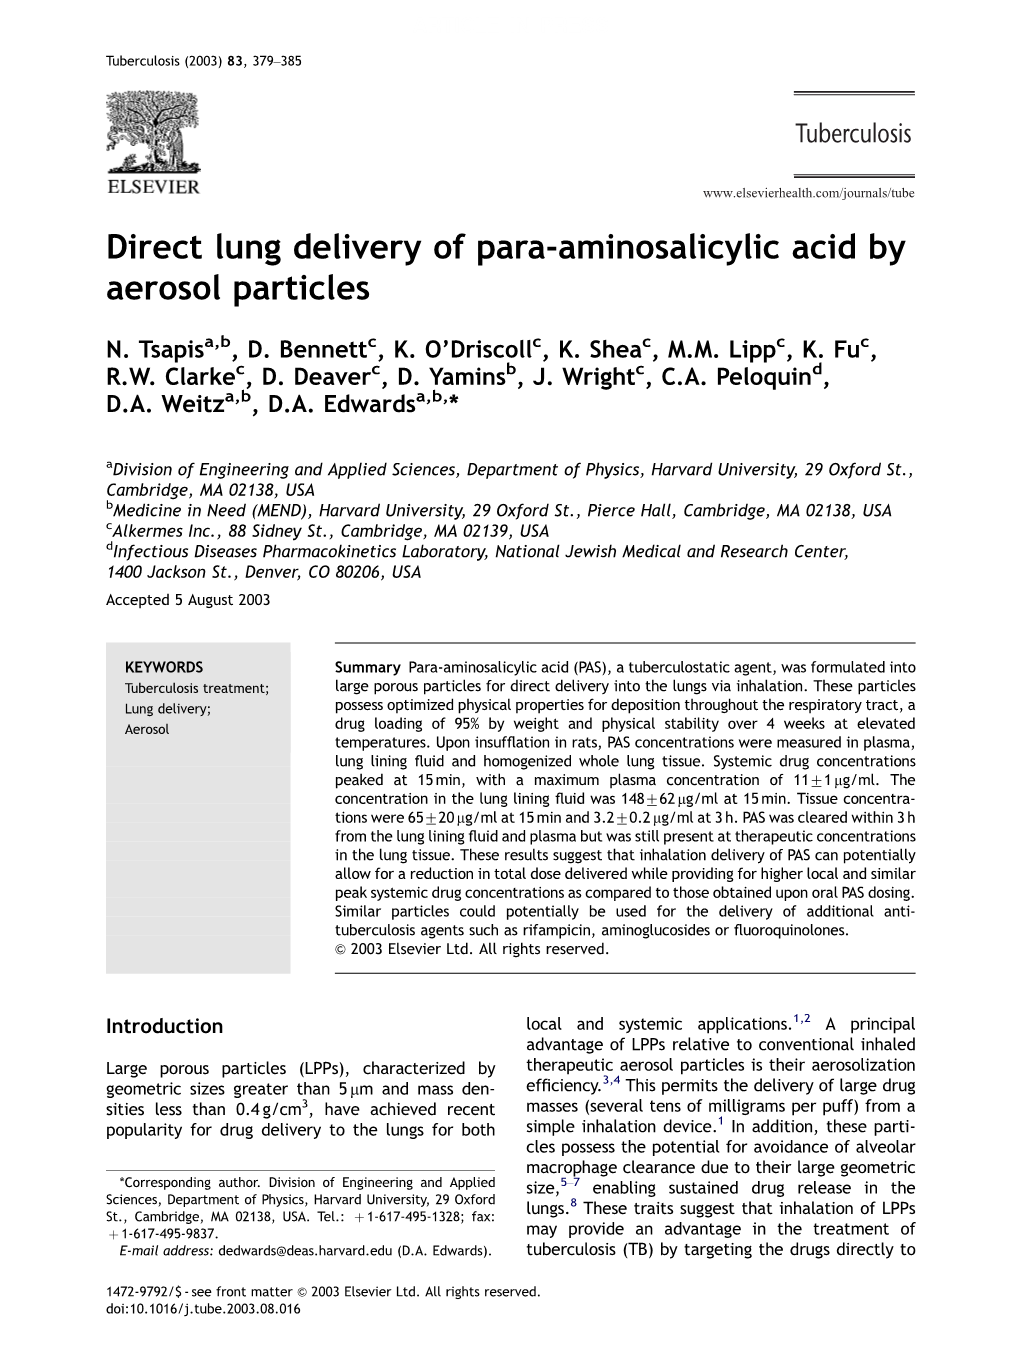 Direct Lung Delivery of Para-Aminosalicylic Acid by Aerosol Particles